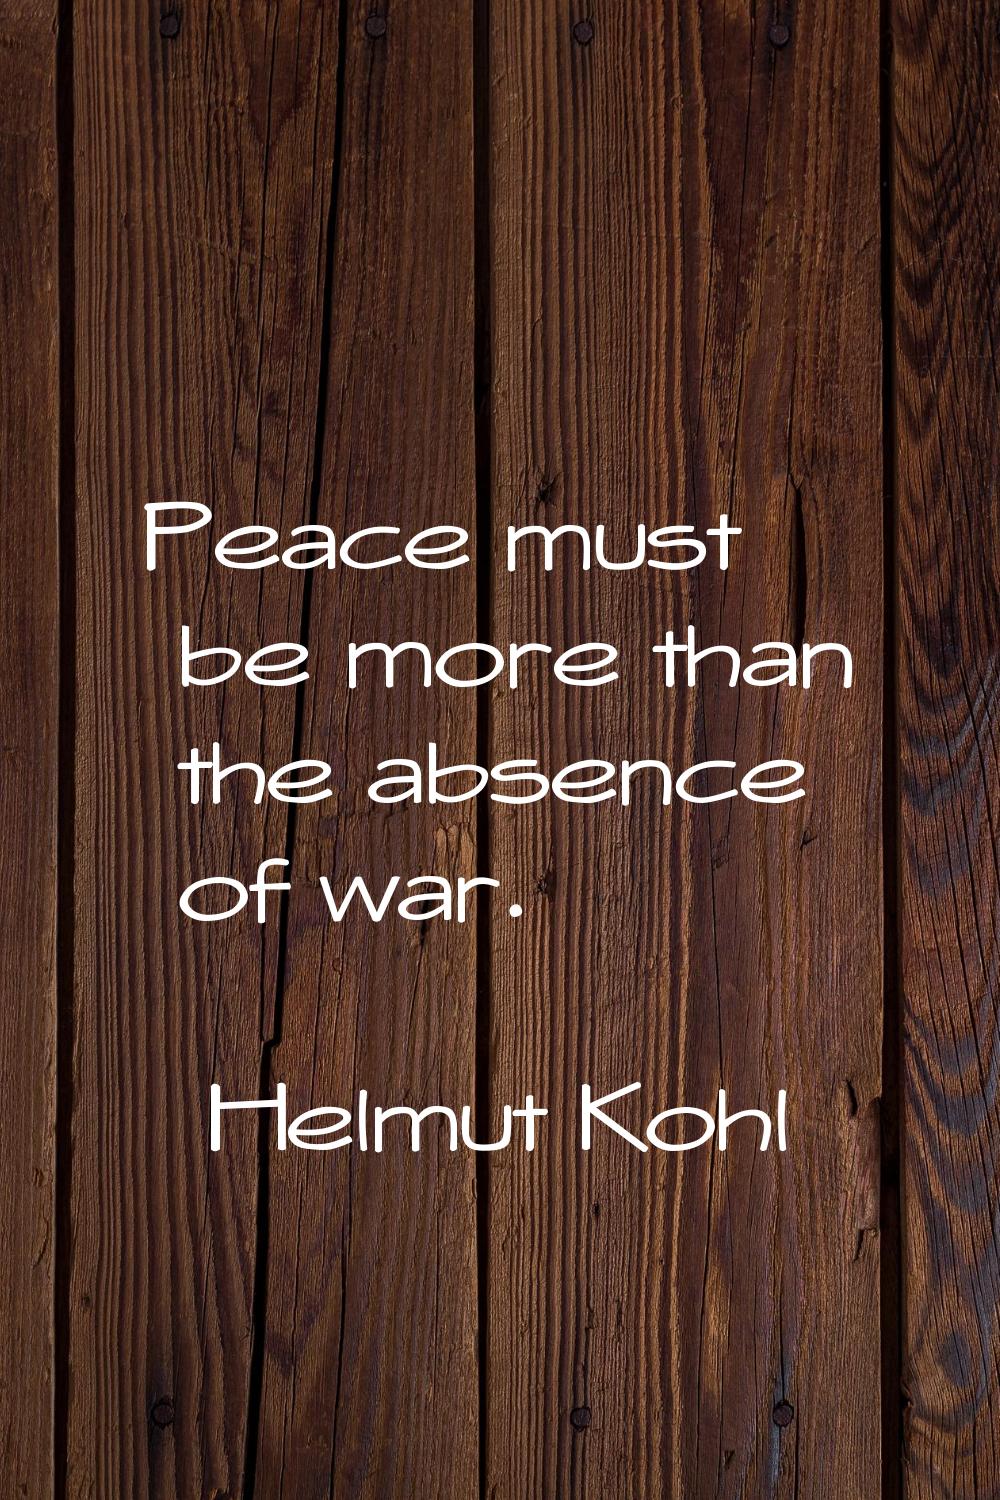 Peace must be more than the absence of war.